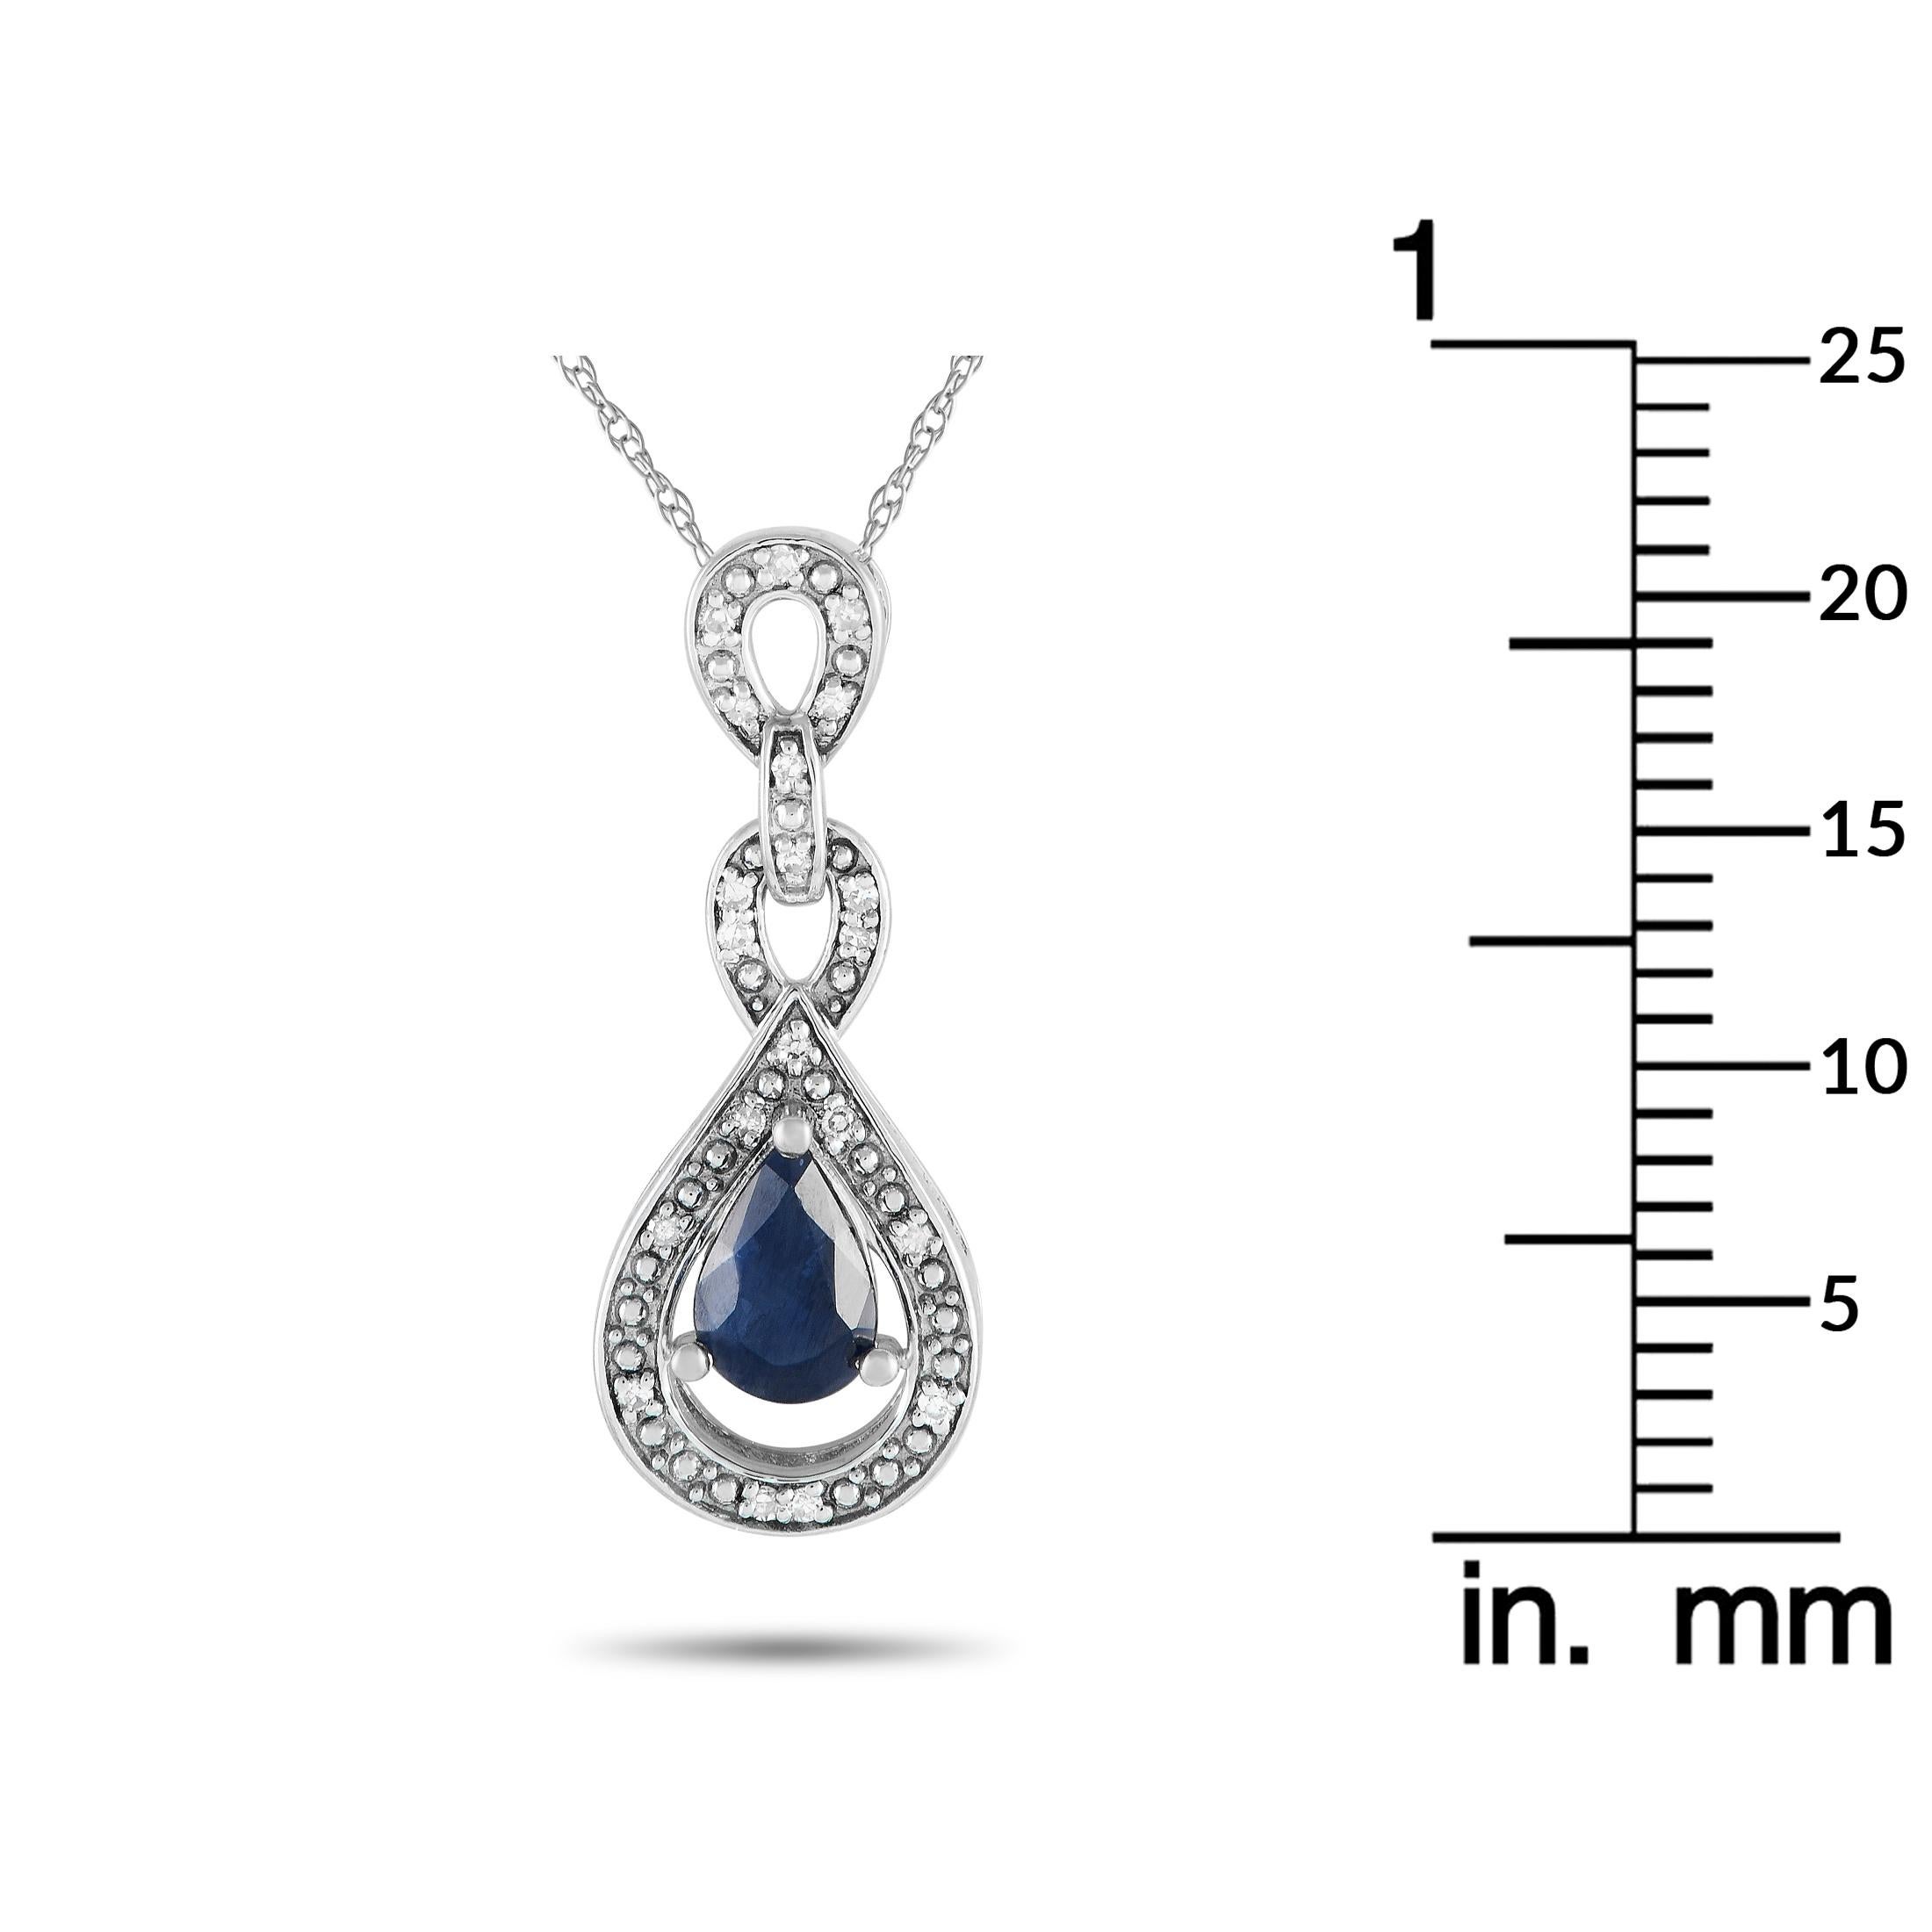 LB Exclusive 14K White Gold 0.08ct Diamond Pendant Necklace PD4-16318WSA In New Condition For Sale In Southampton, PA